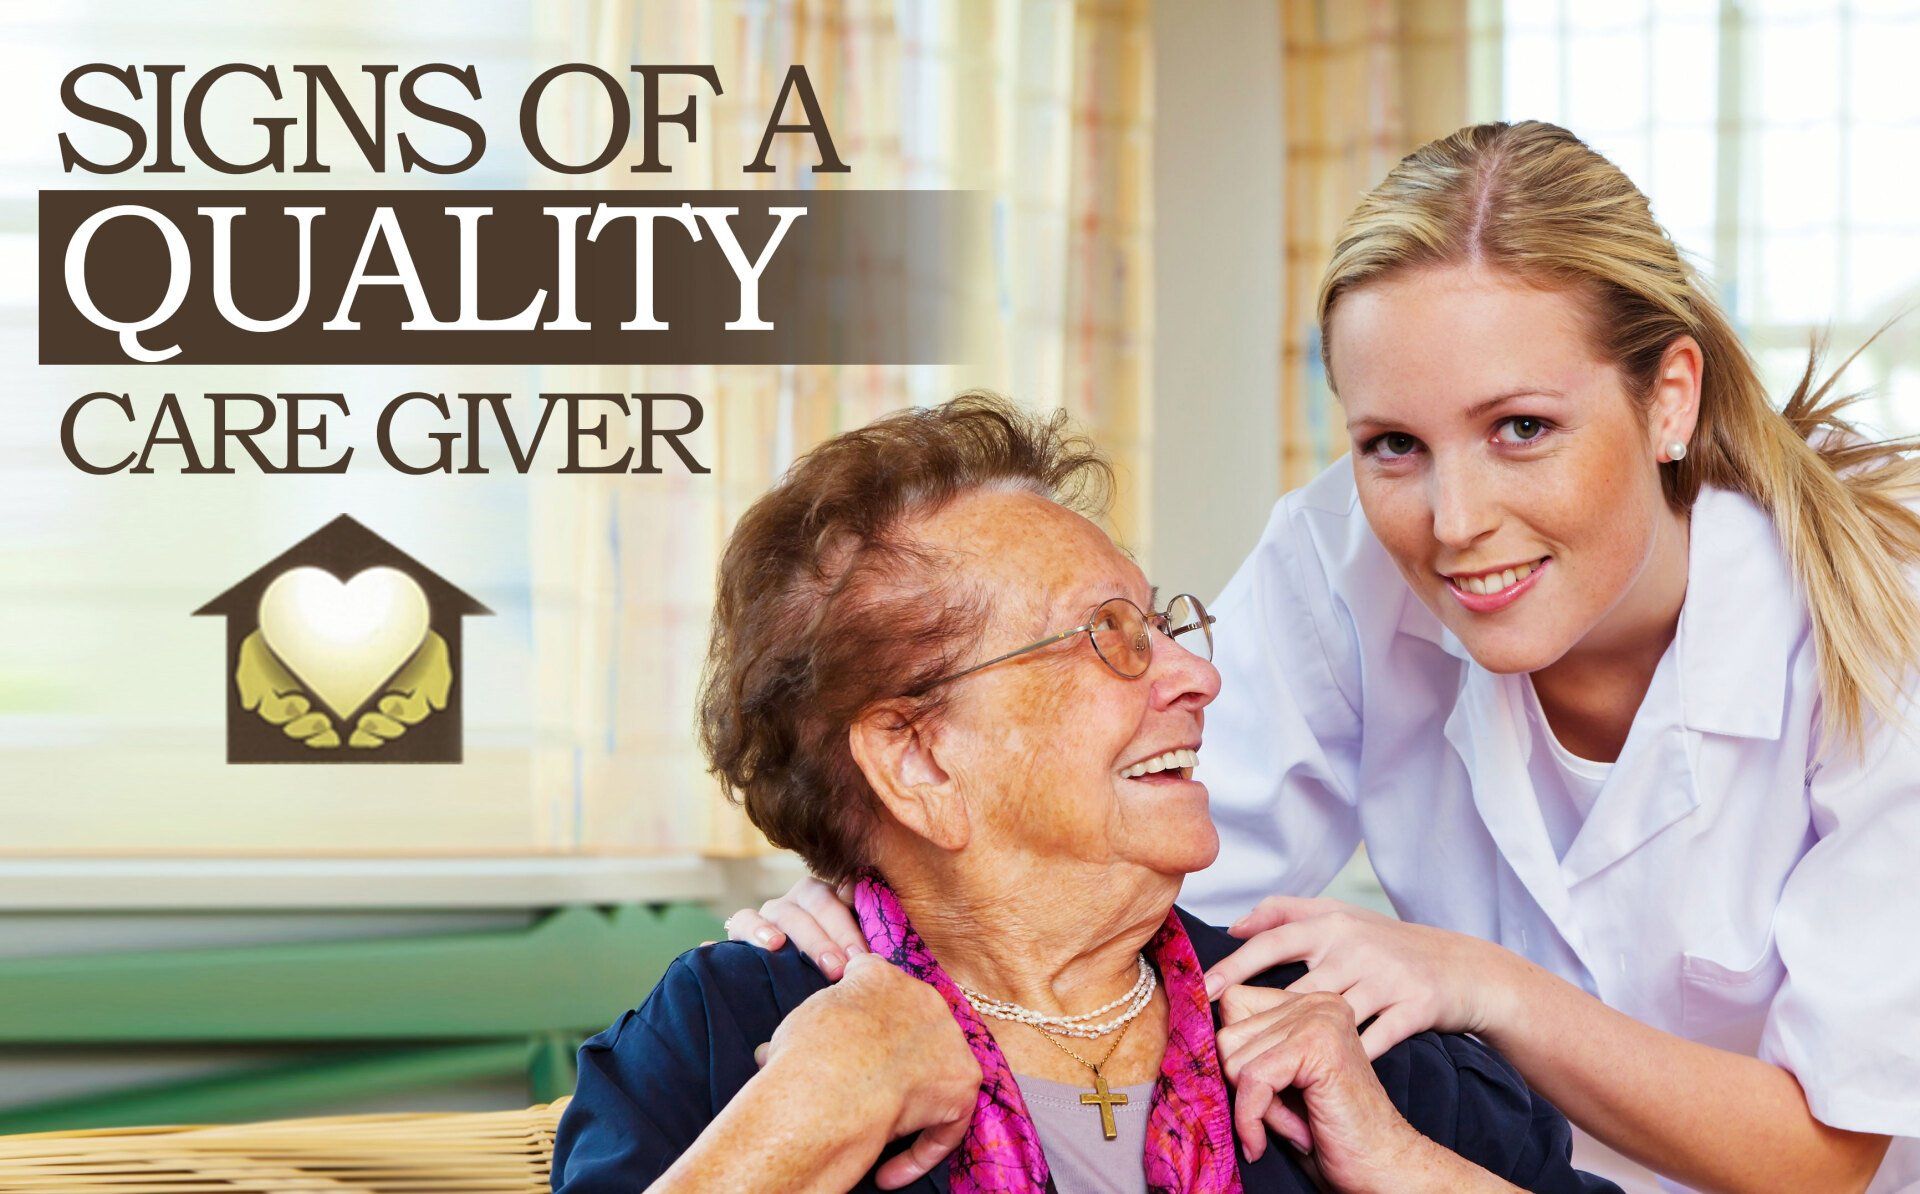 Important Qualities Of A Caregiver